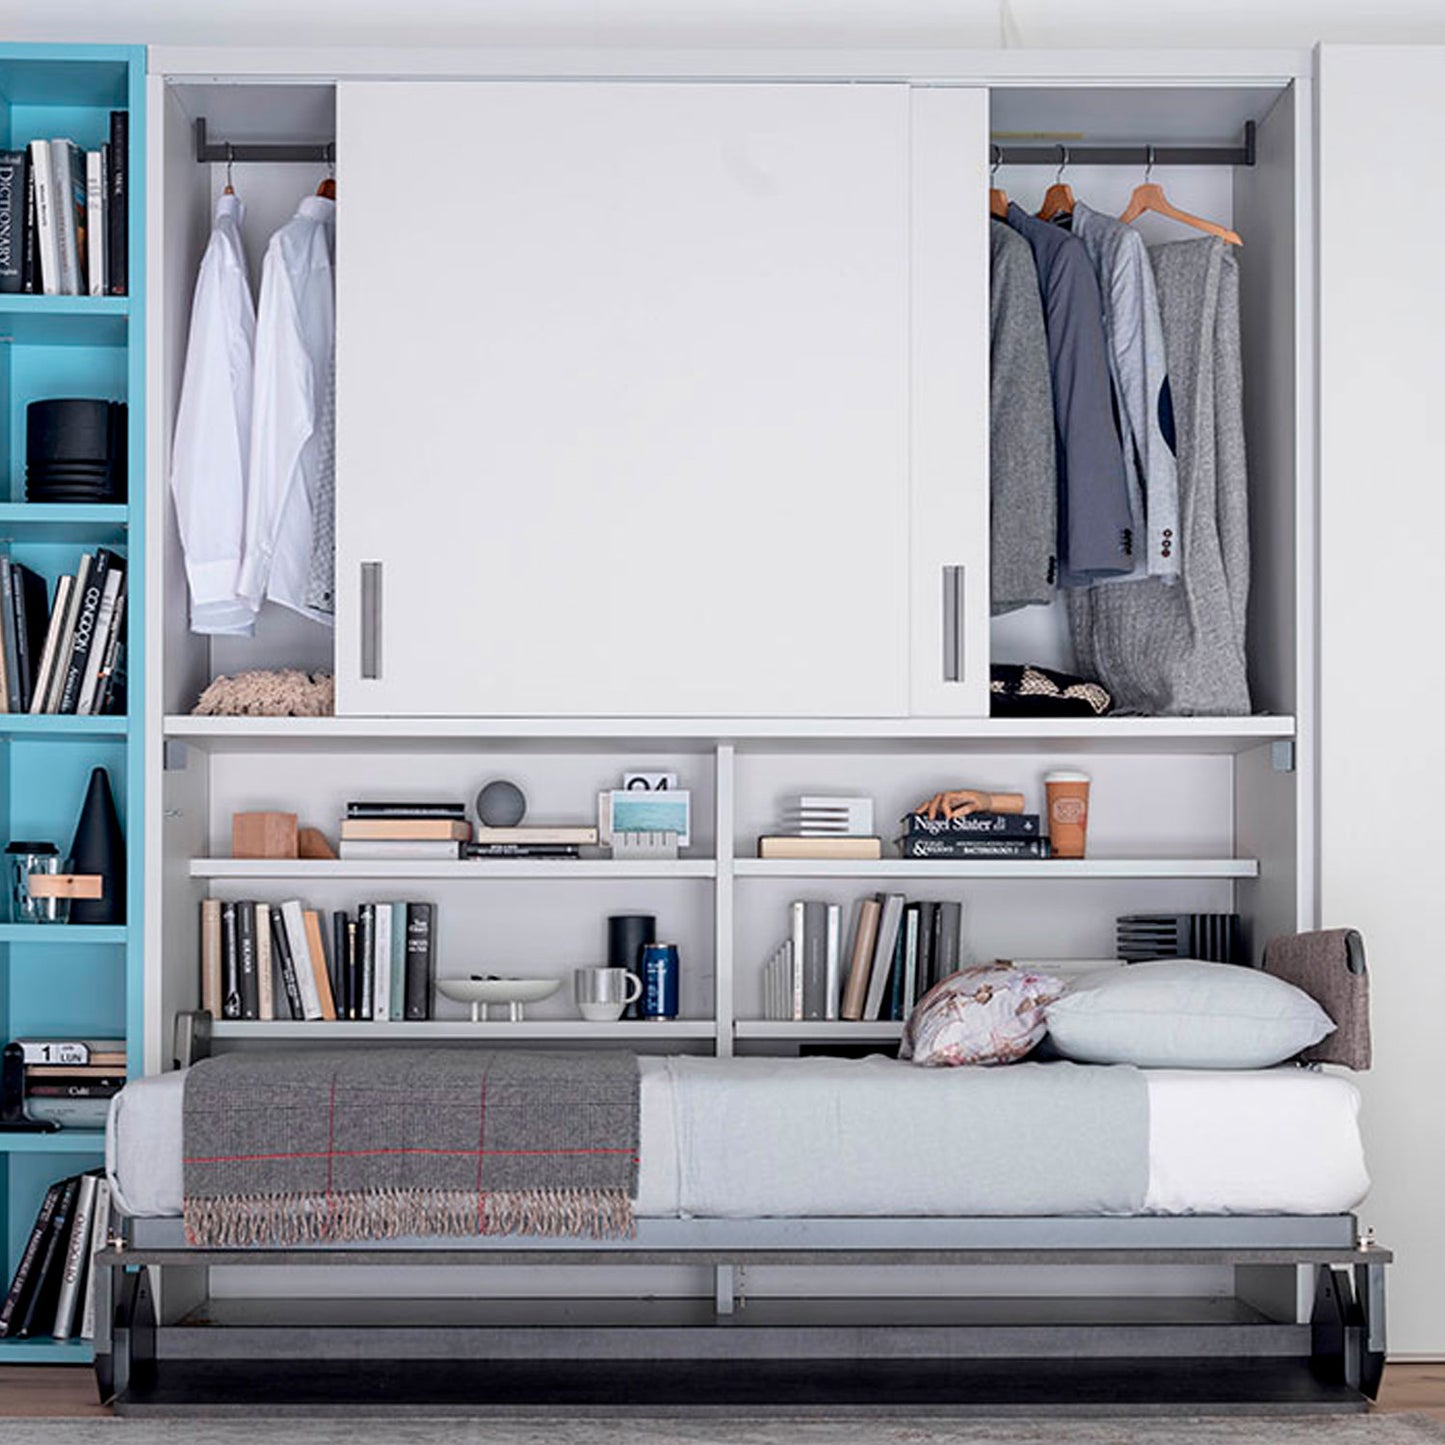 IM20-10 Foldaway Bed by Clever